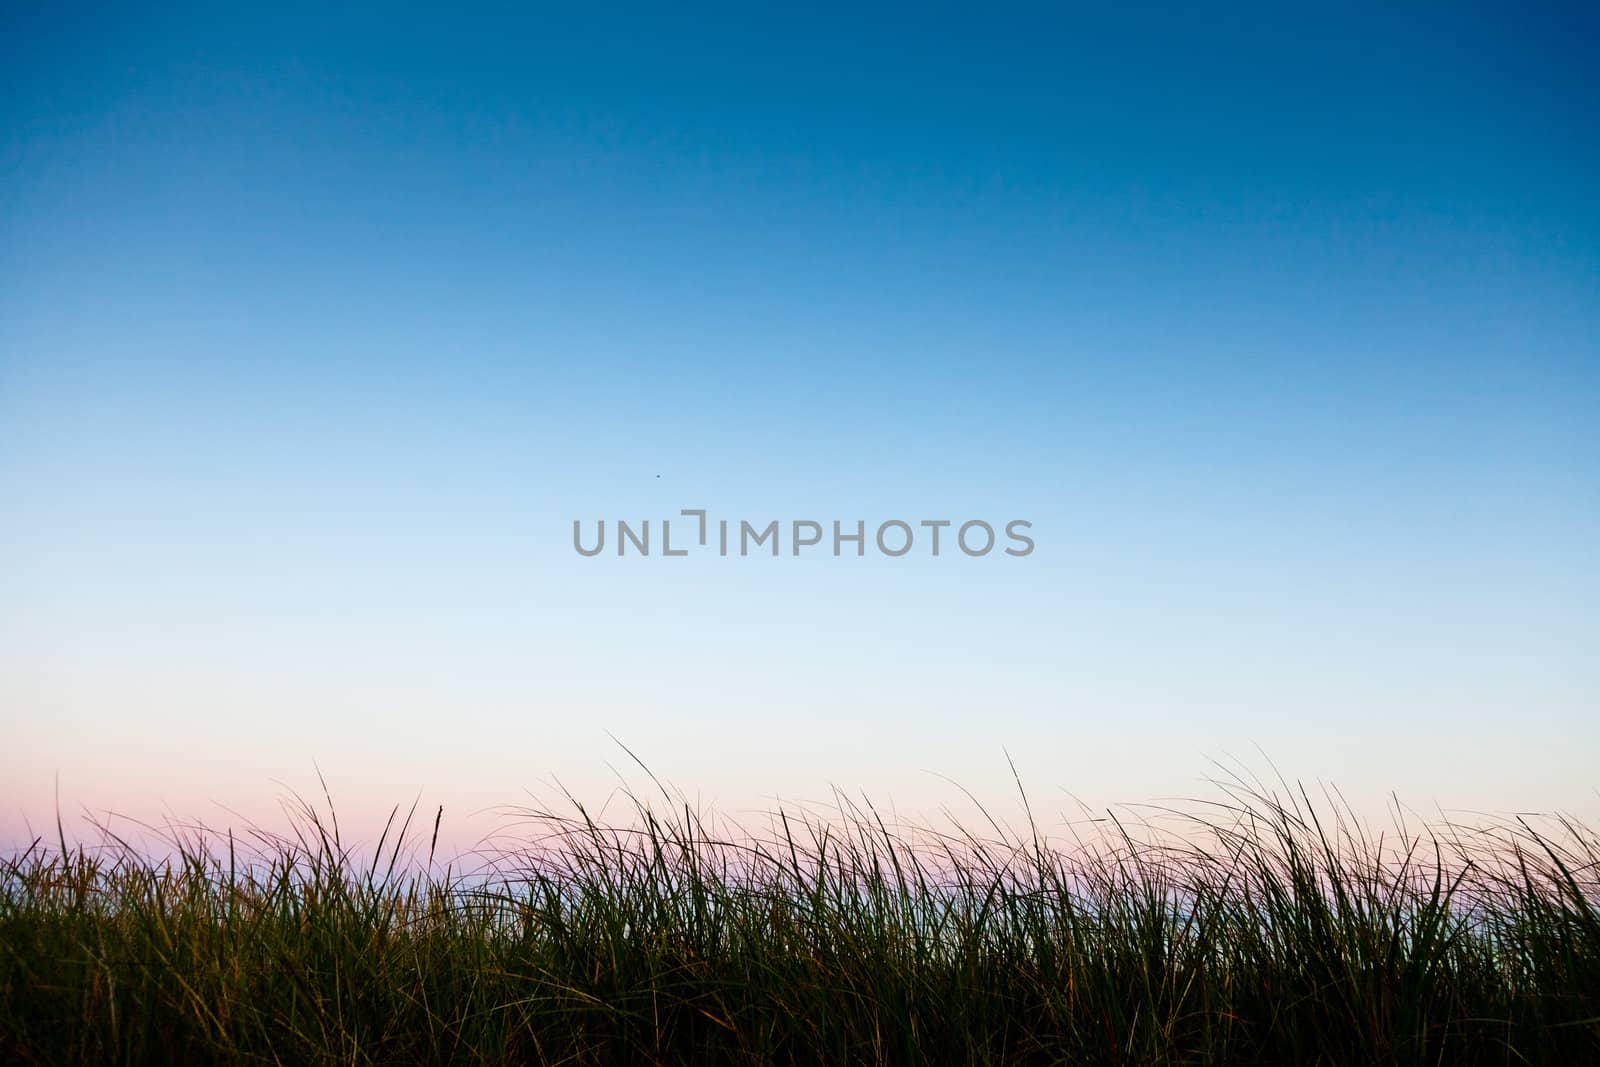 Long grass in silhouette with room for text